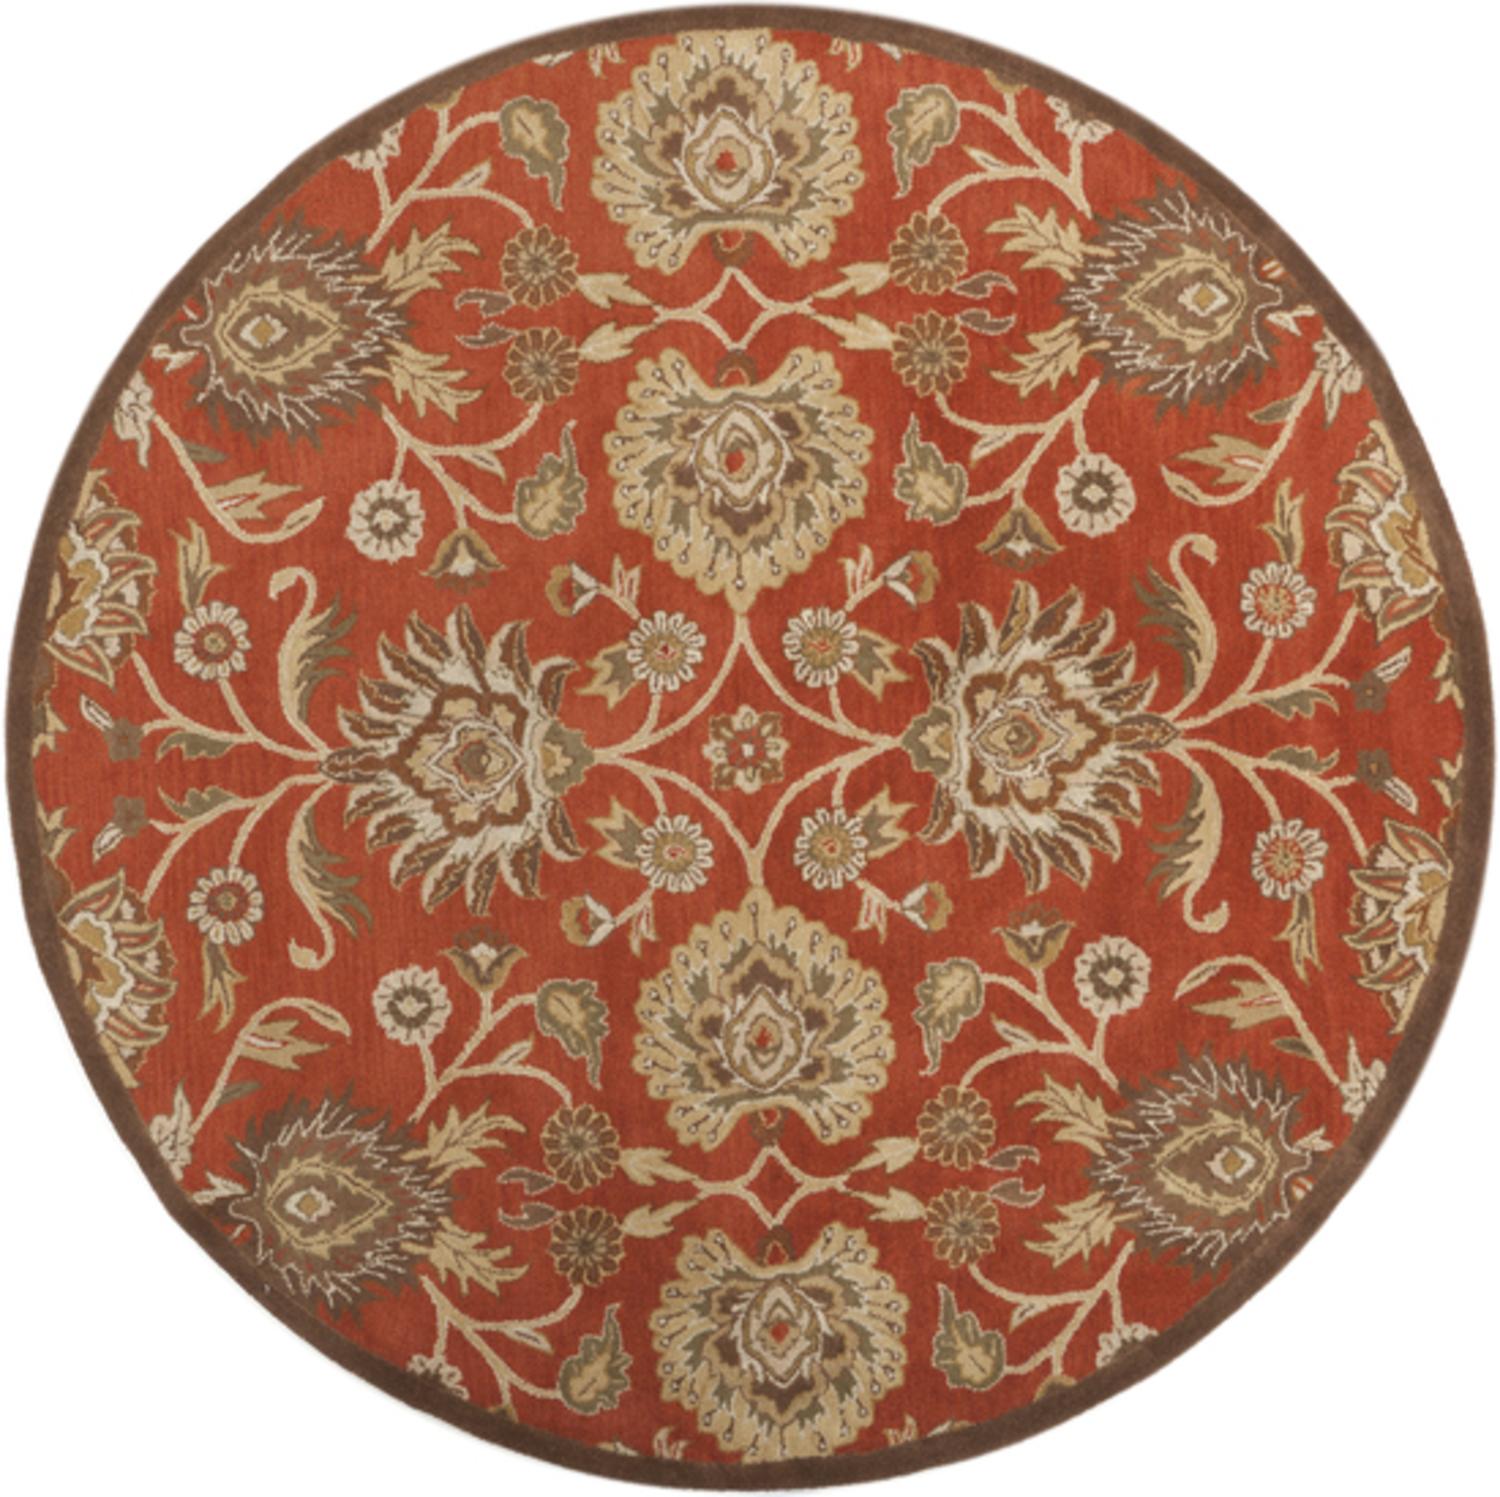 Diva At Home 9.75' Octavia Spicy Brown and Camel Hand Tufted Wool Round Area Throw Rug